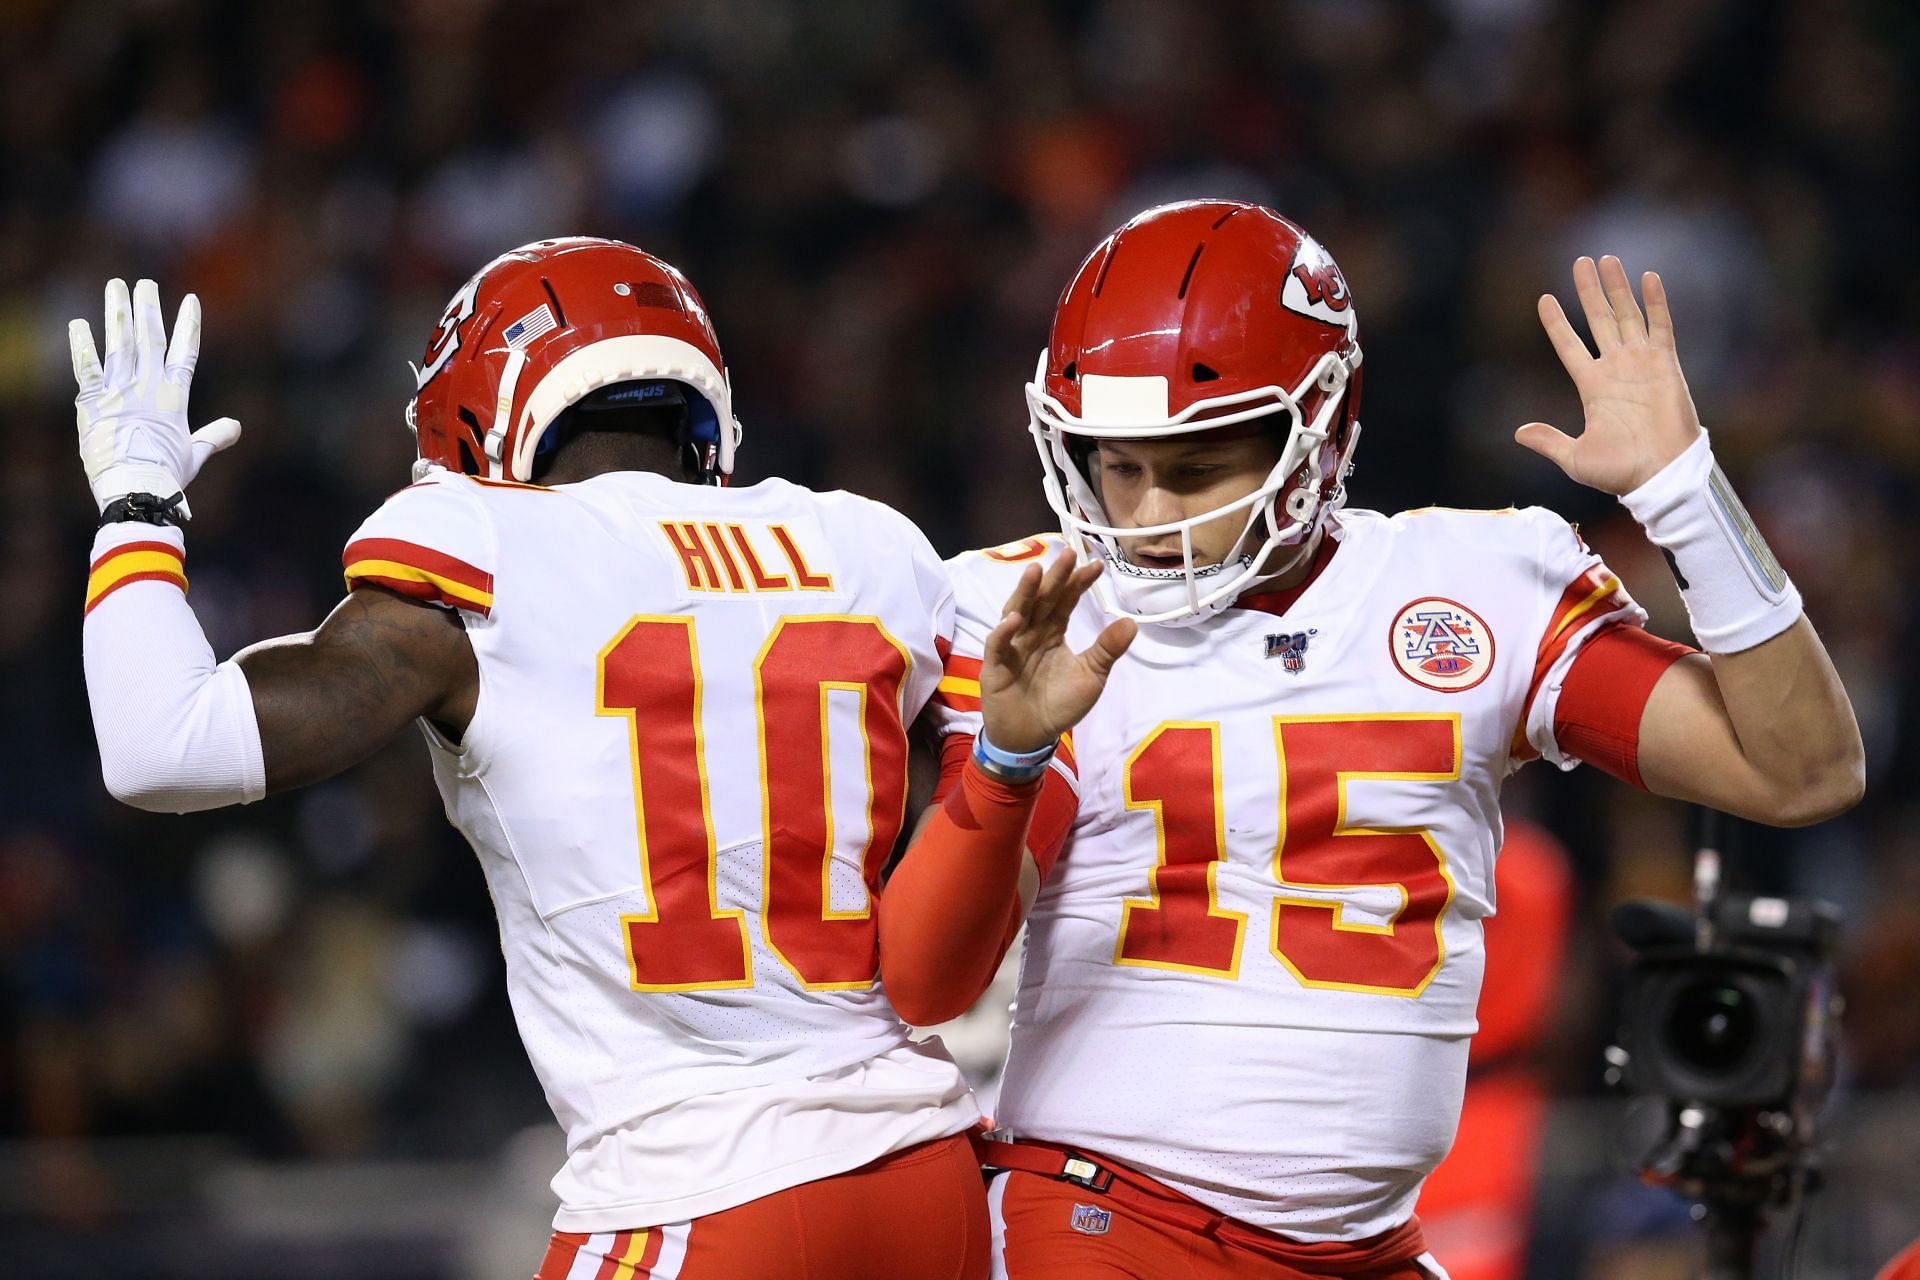 Mahomes and Hill with the Kansas City Chiefs were a dynamic duo